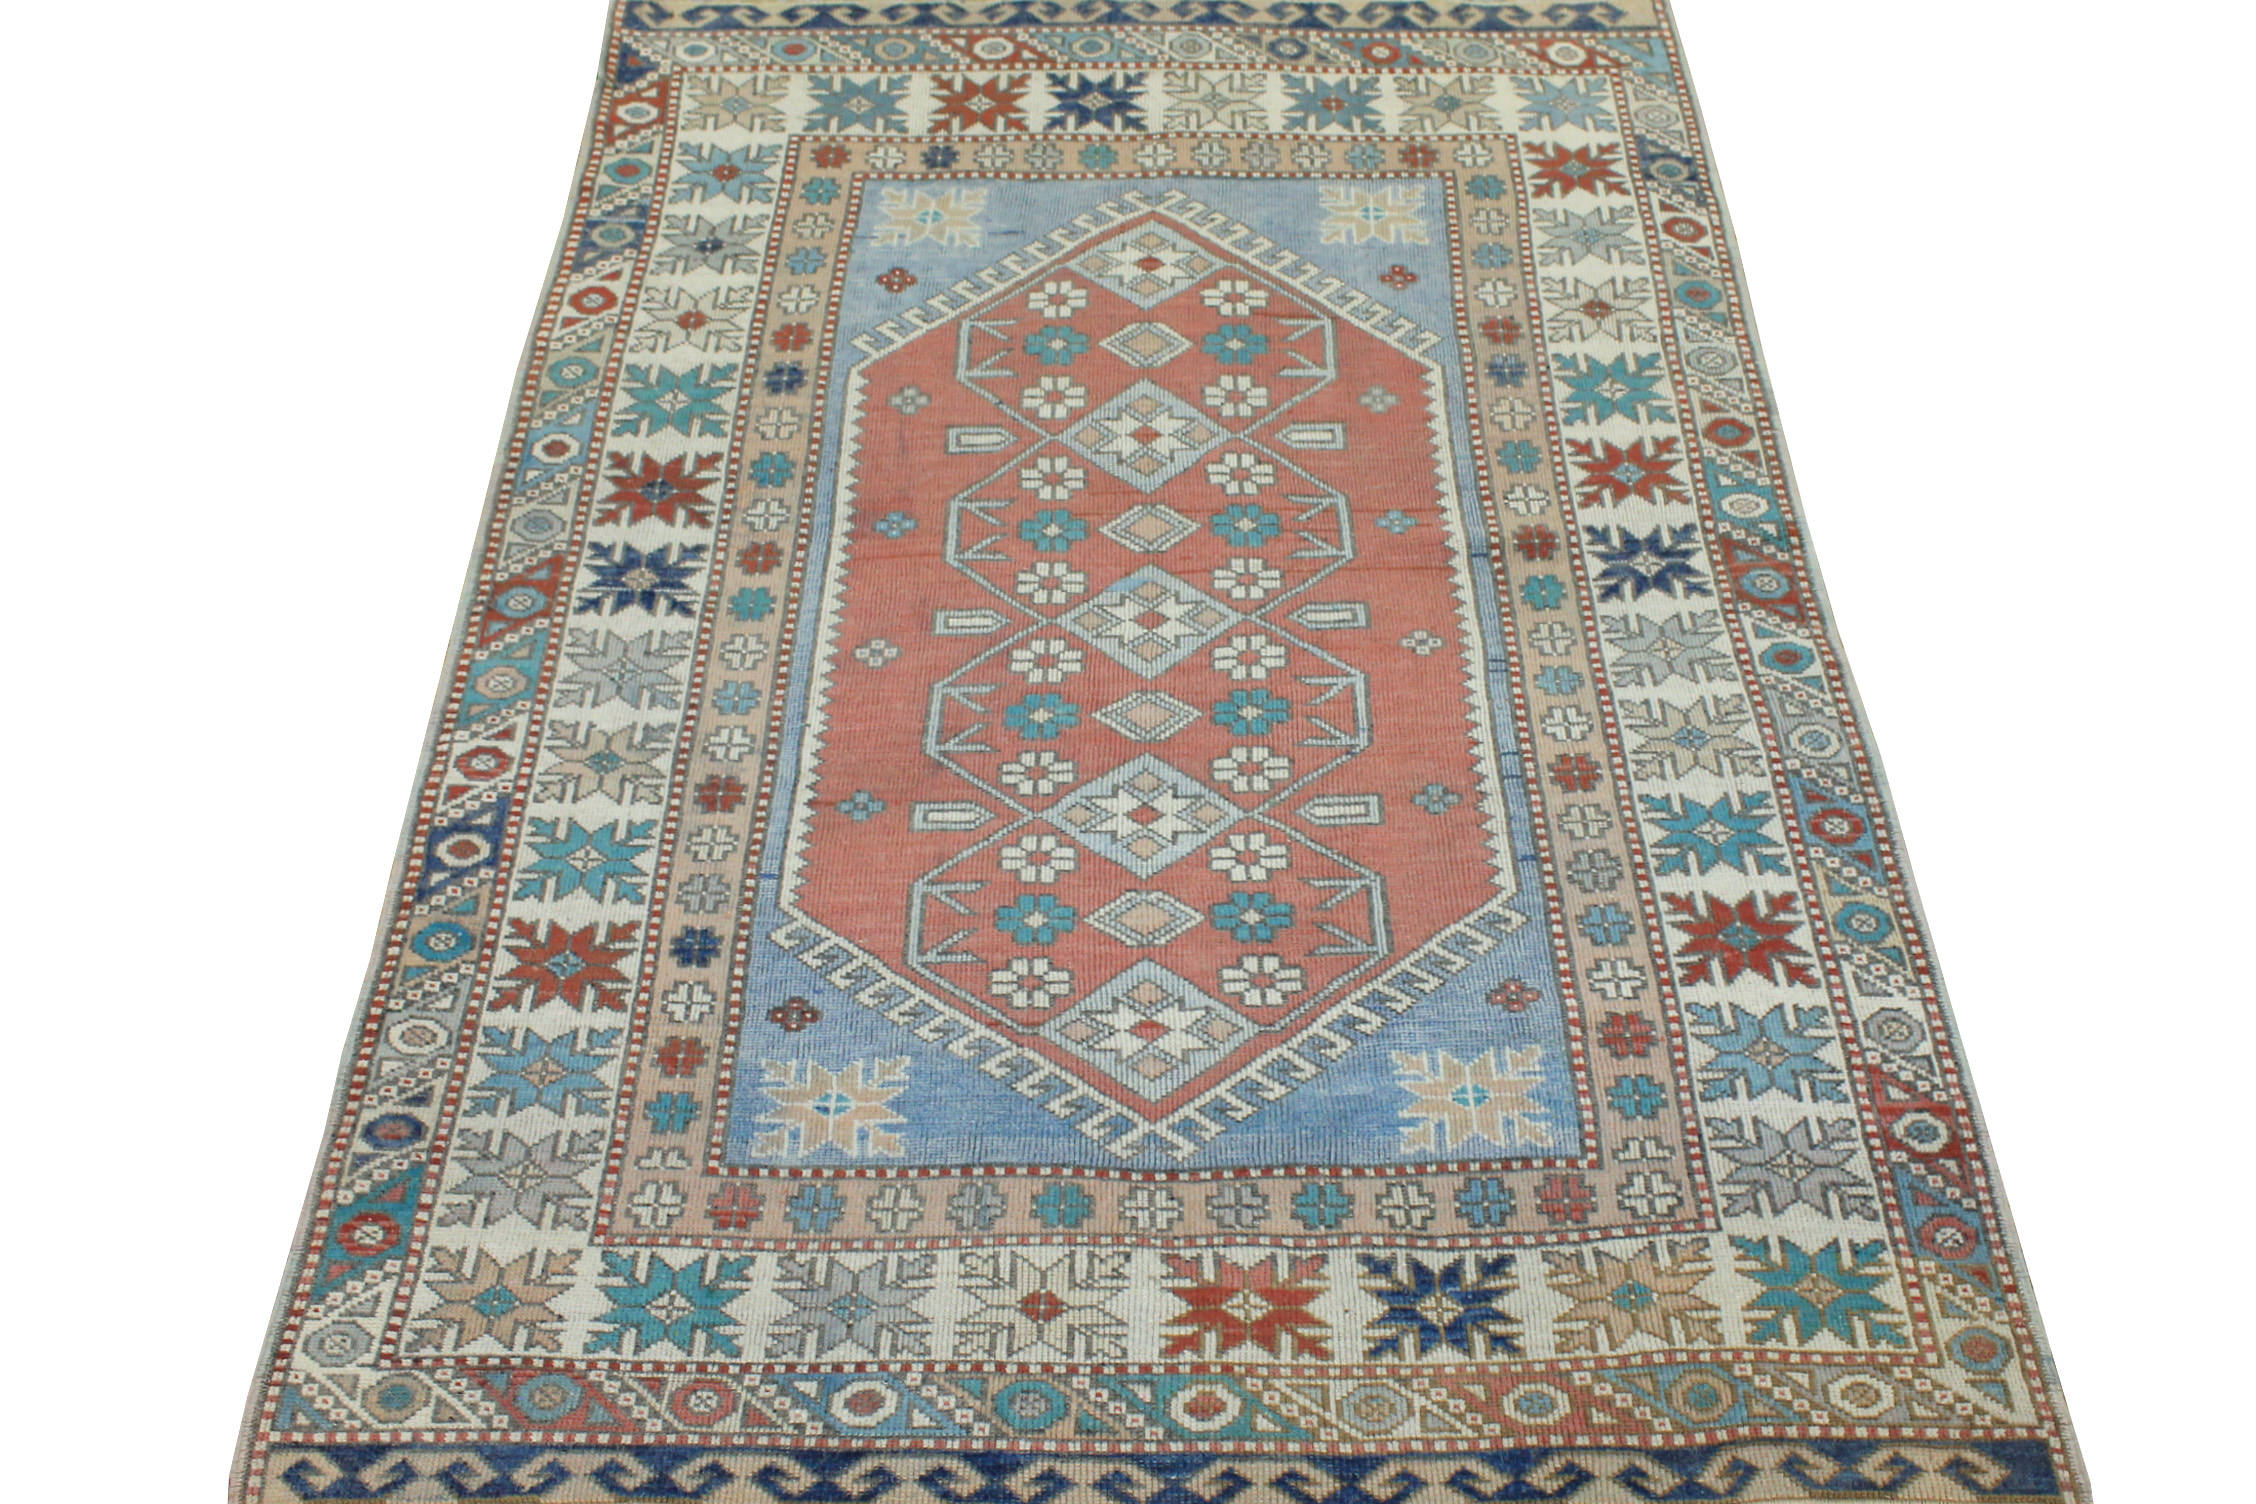 4x6 Tribal Hand Knotted Wool Area Rug - MR022607